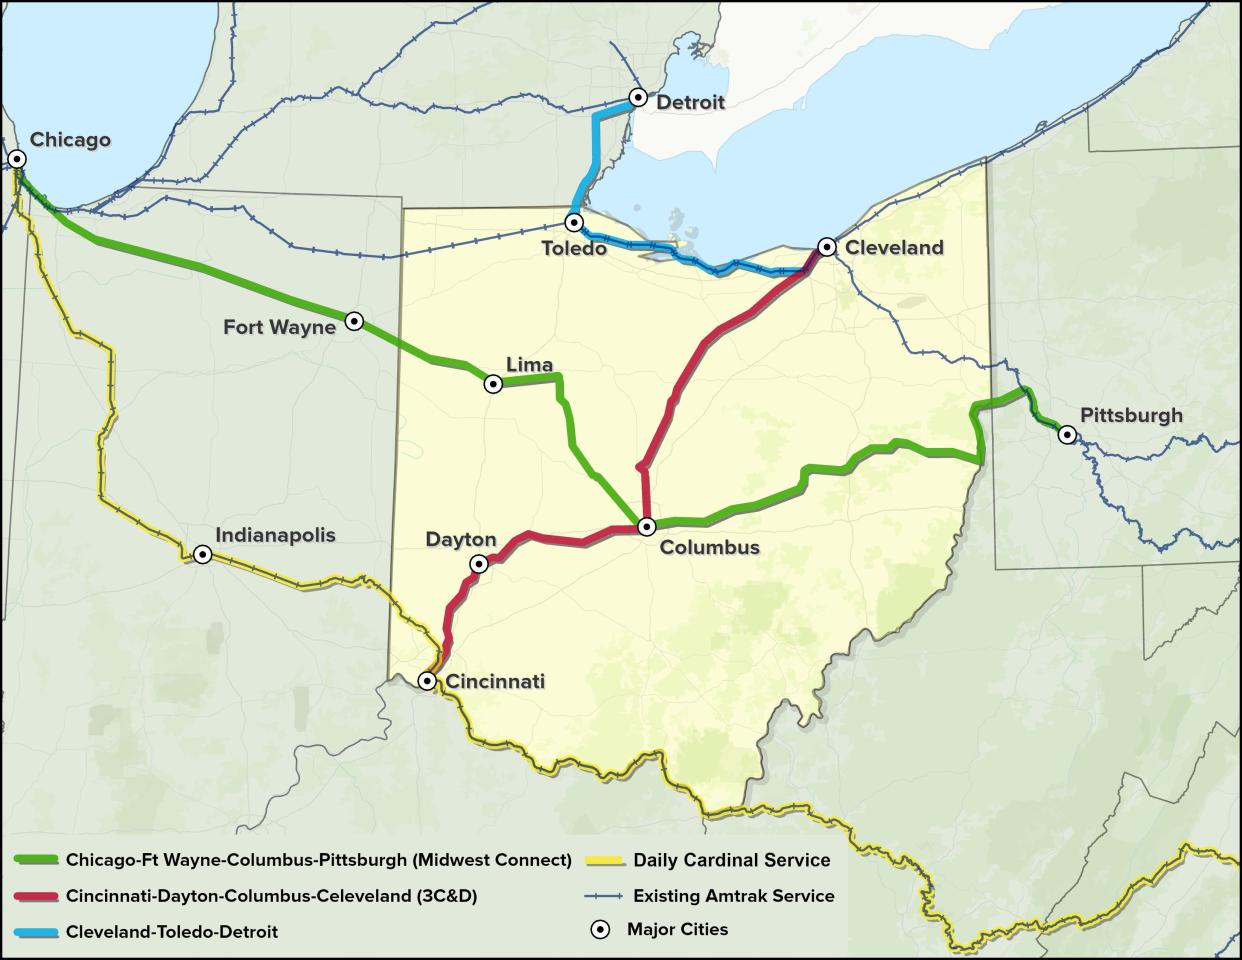 This map shows routes that will be studied for potential Amtrak service expansion.